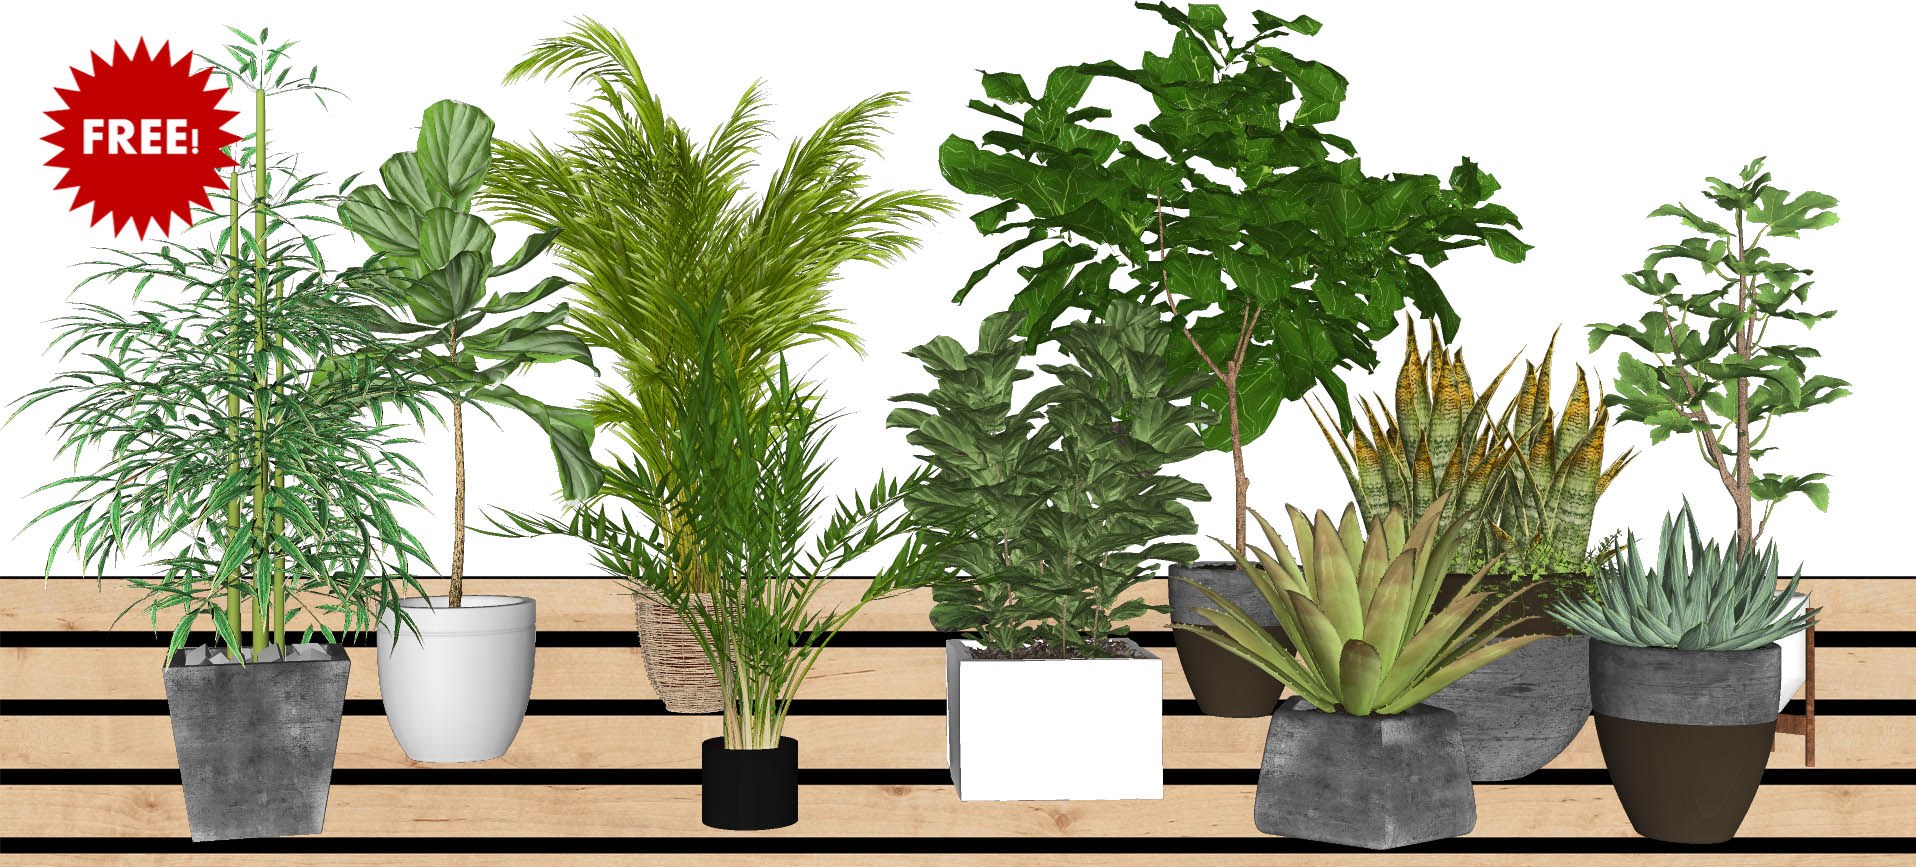 10 SketchUp 3D plants in pots collection #1